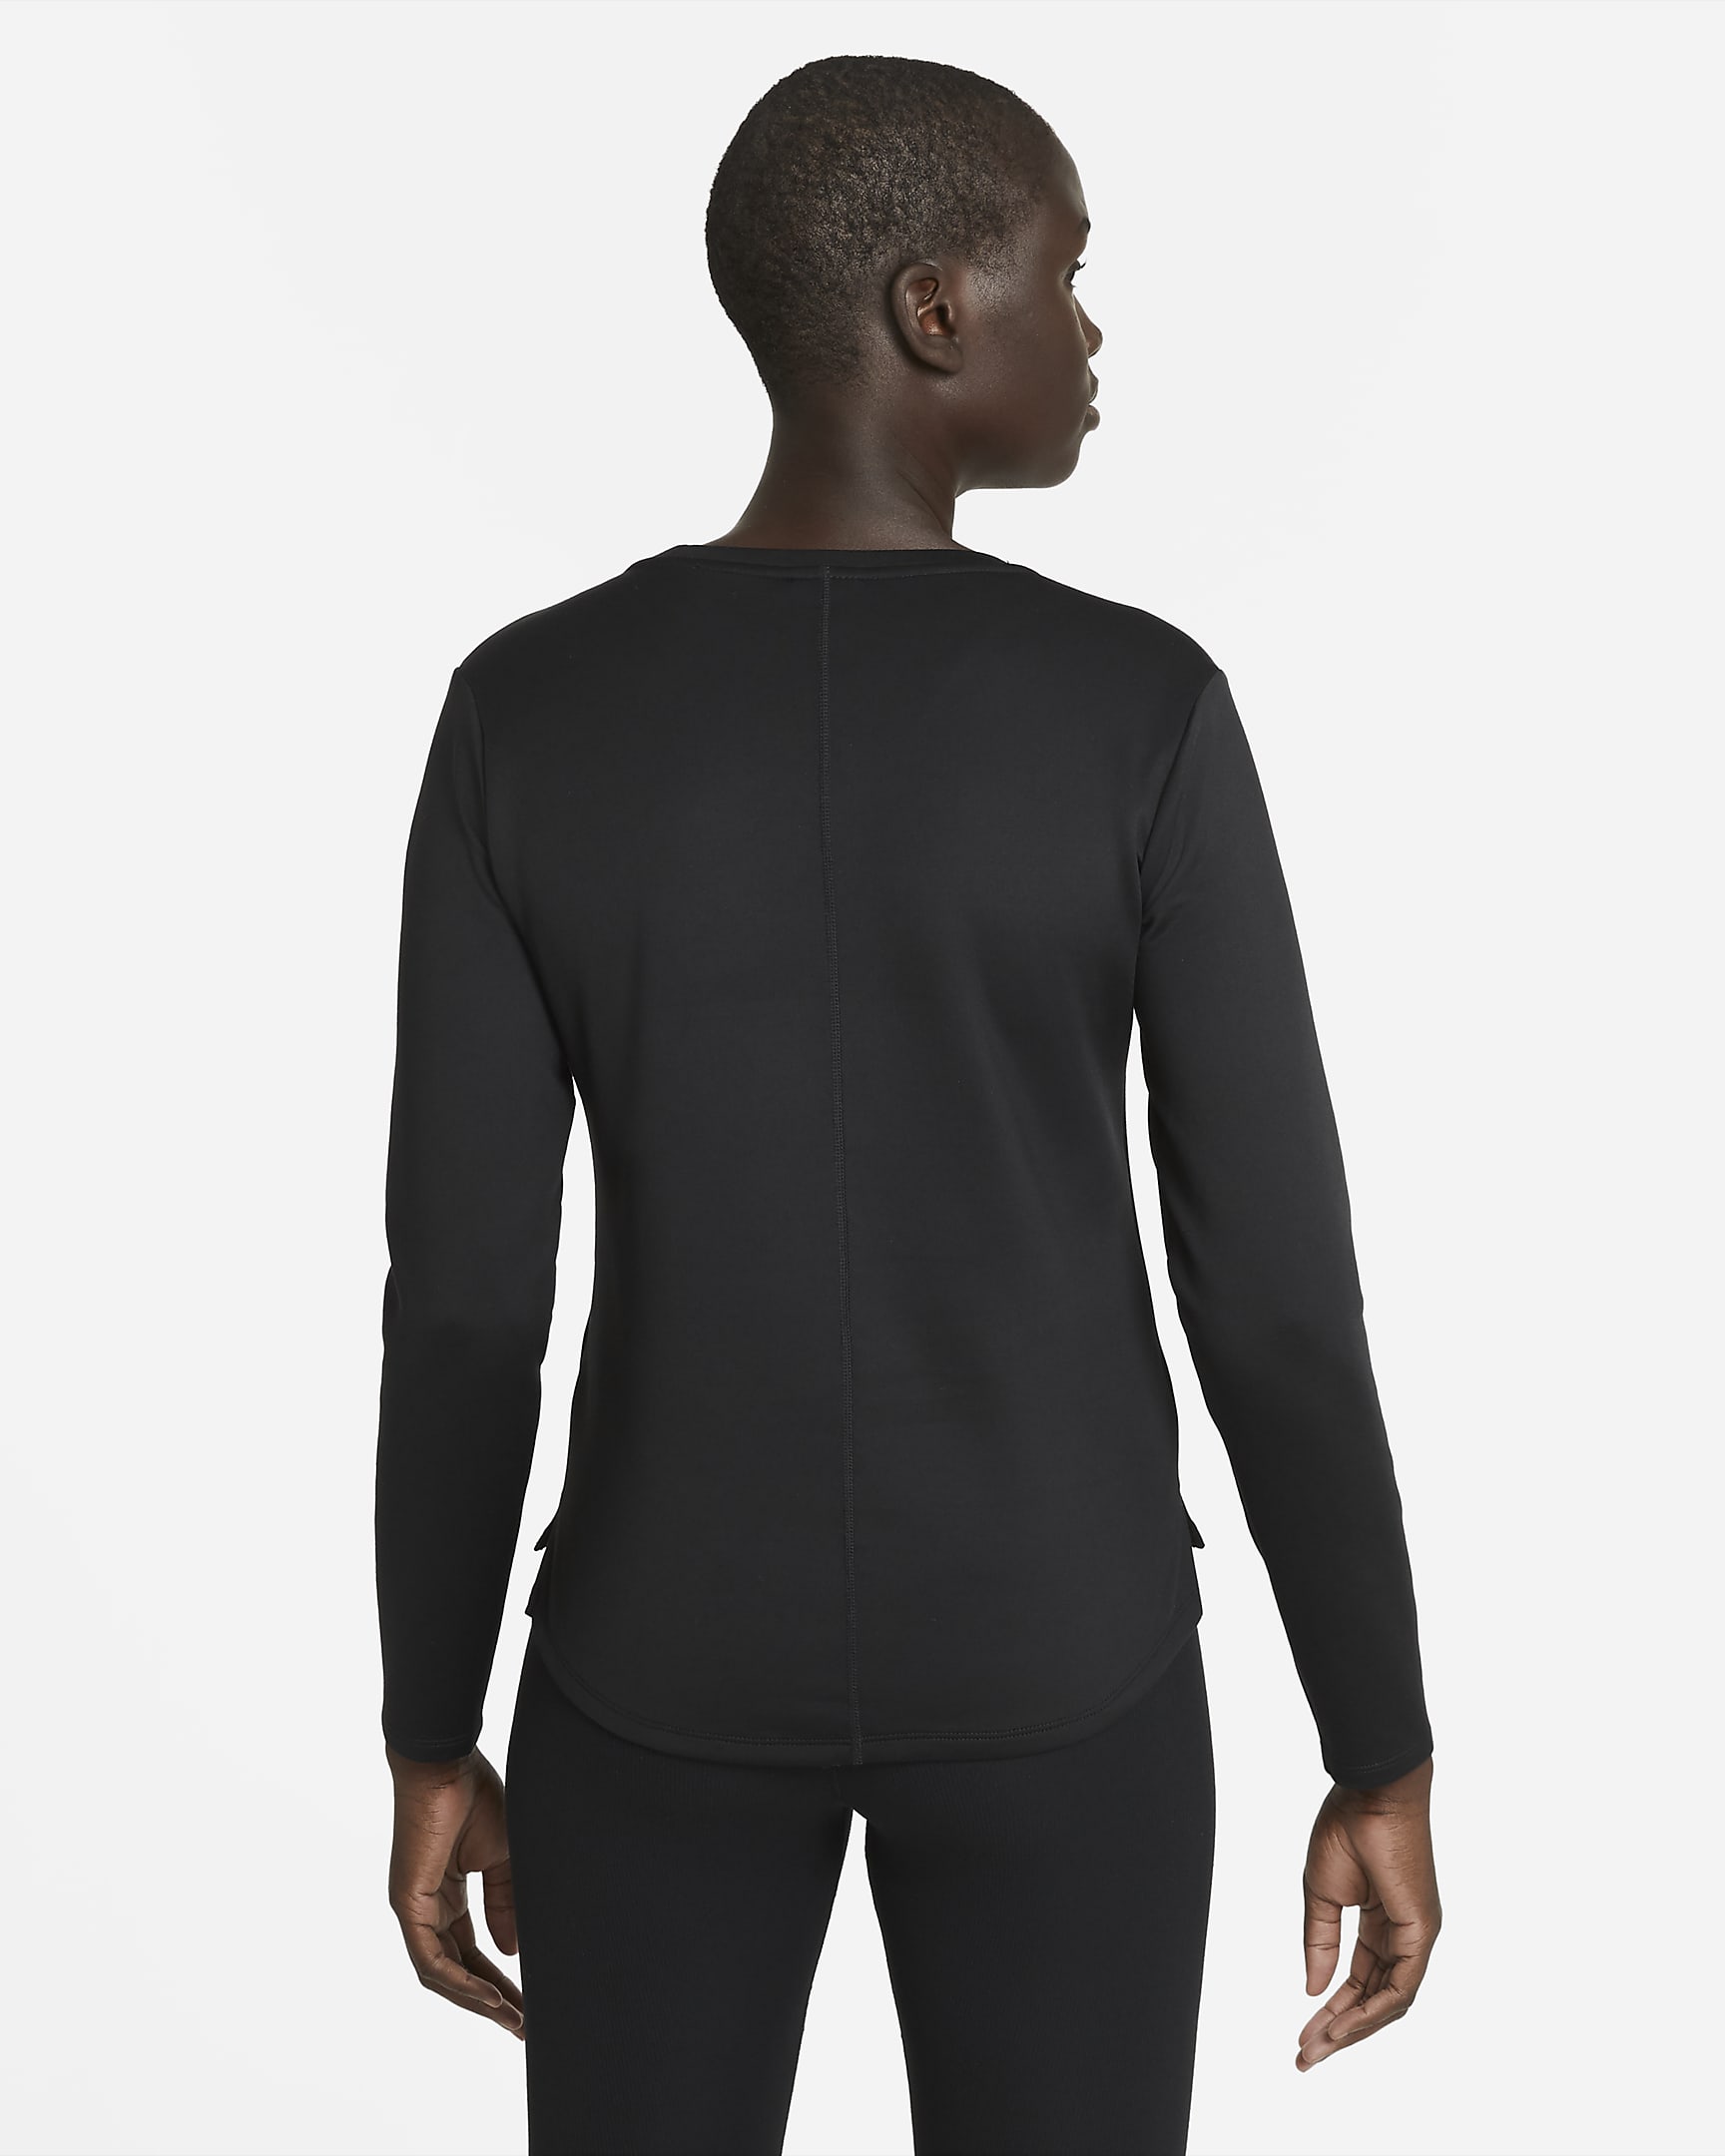 Nike Therma-FIT One Women's Long-Sleeve Top. Nike.com